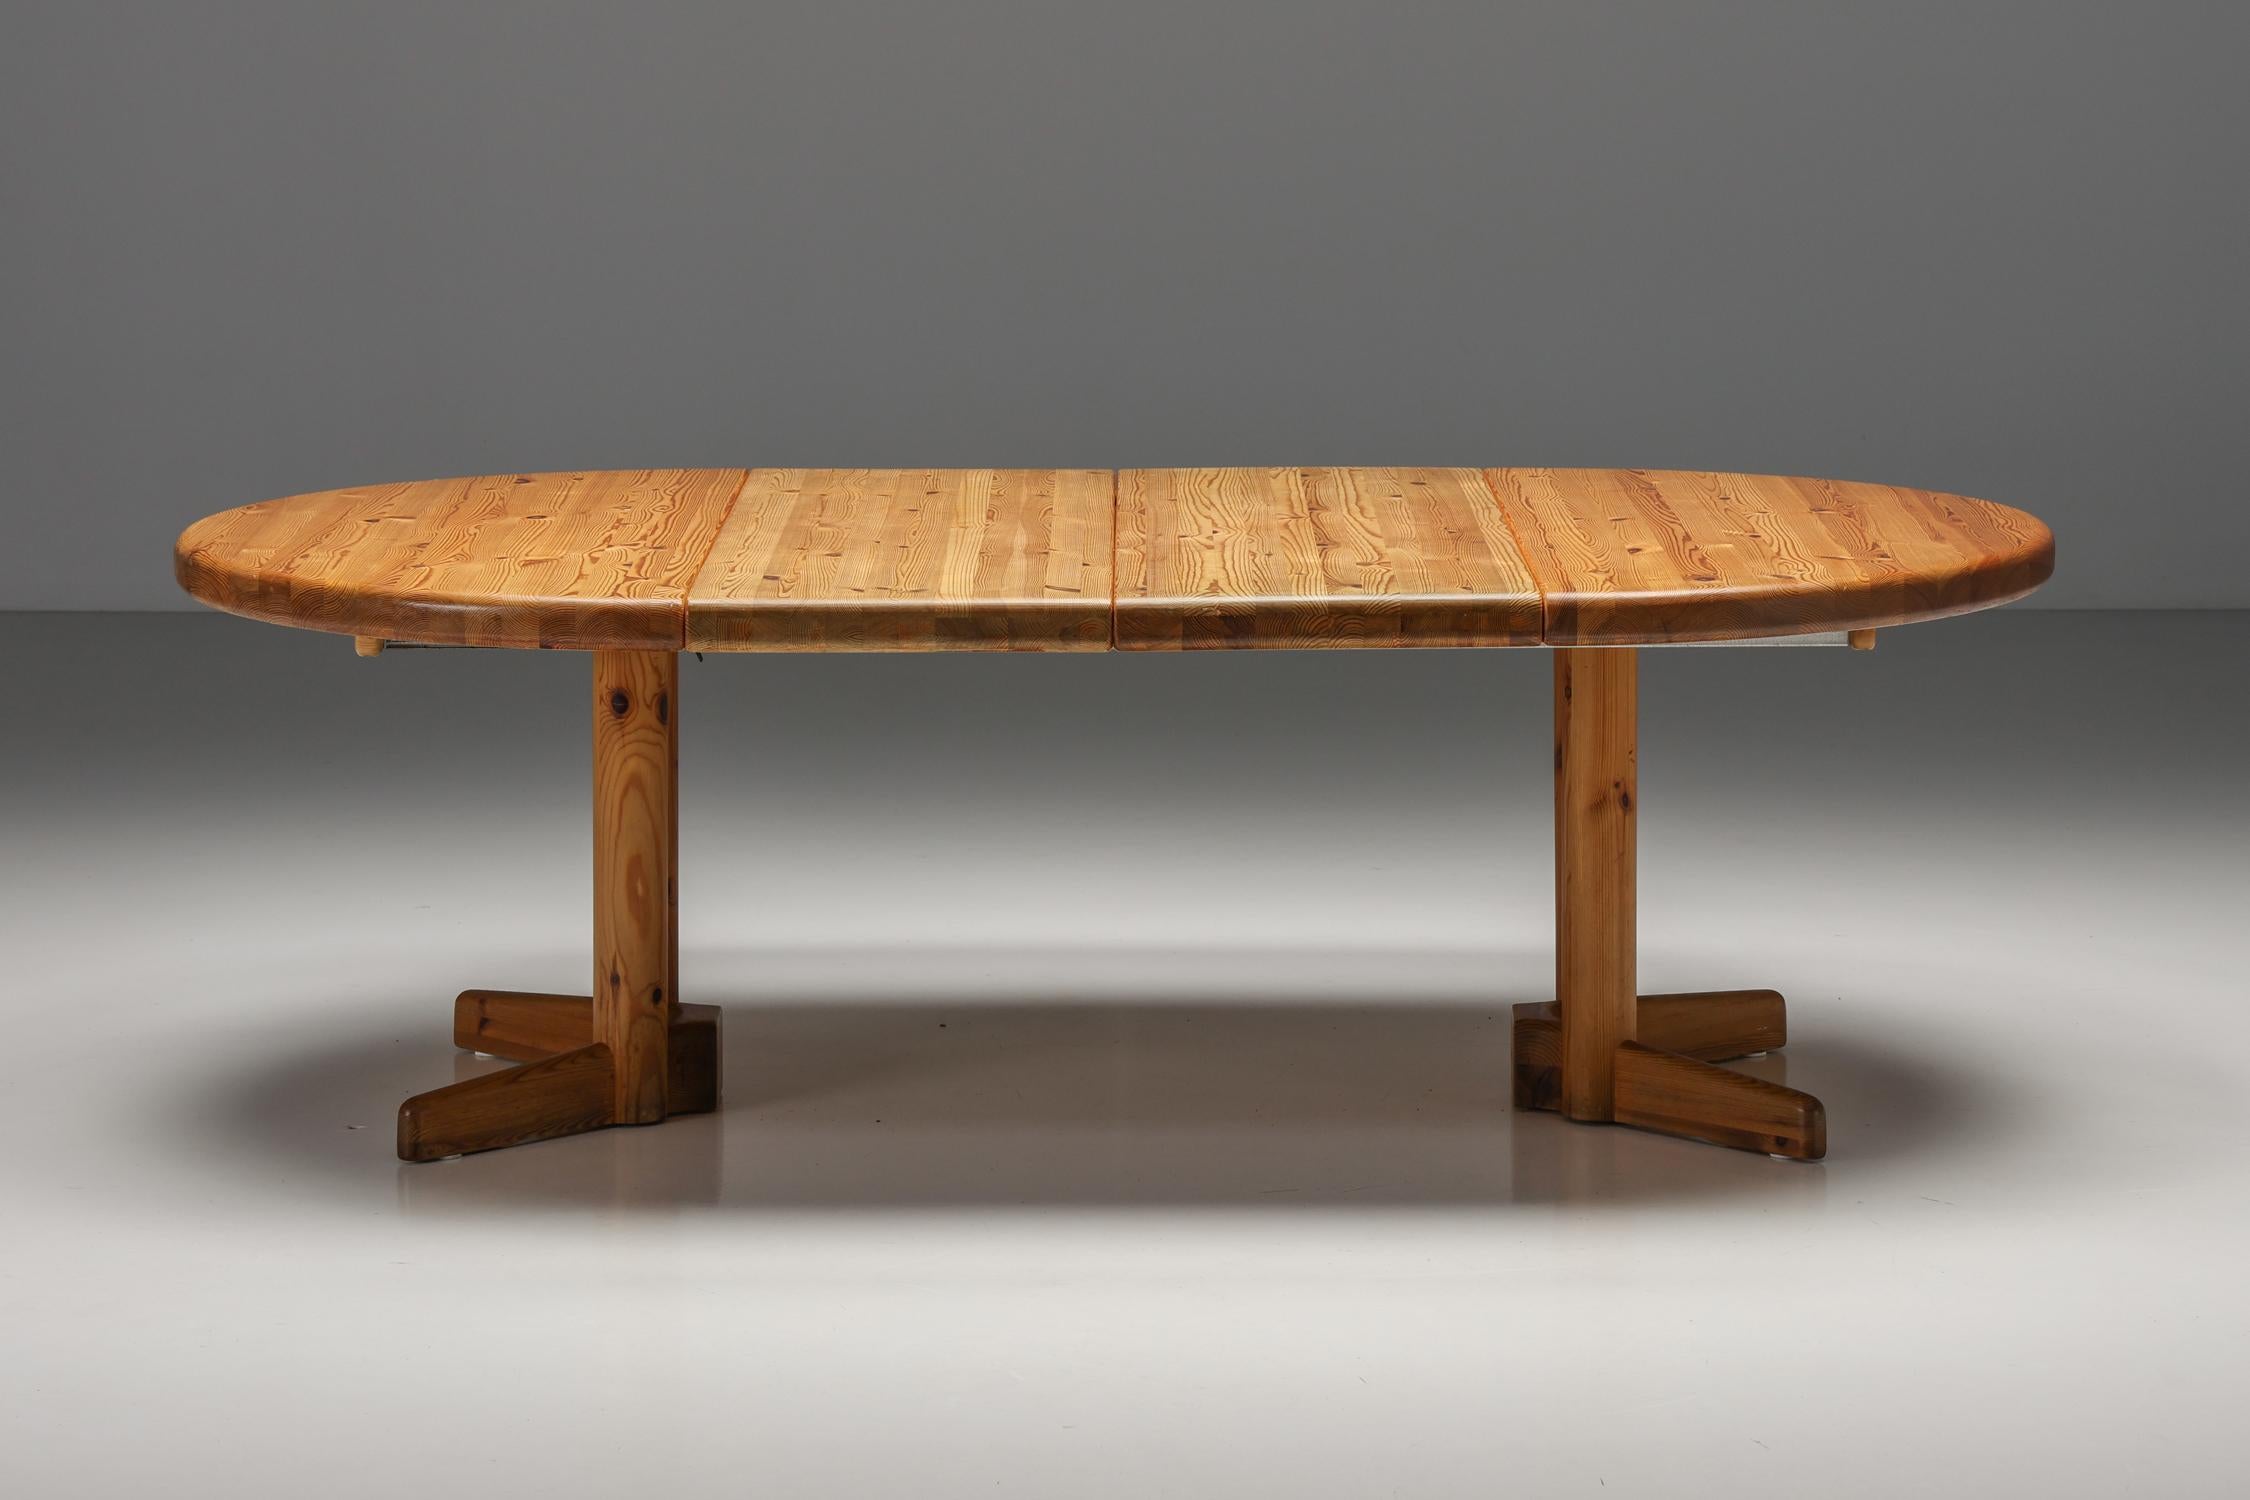 Rainer Daumiller extendable dining table in solid pine, Danish design, 1970's, Scandinavian modern; 

Scandinavian modern round-oval dining table designed by Rainer Daumiller in Denmark in the 1970s. This dining table is extendable and has three